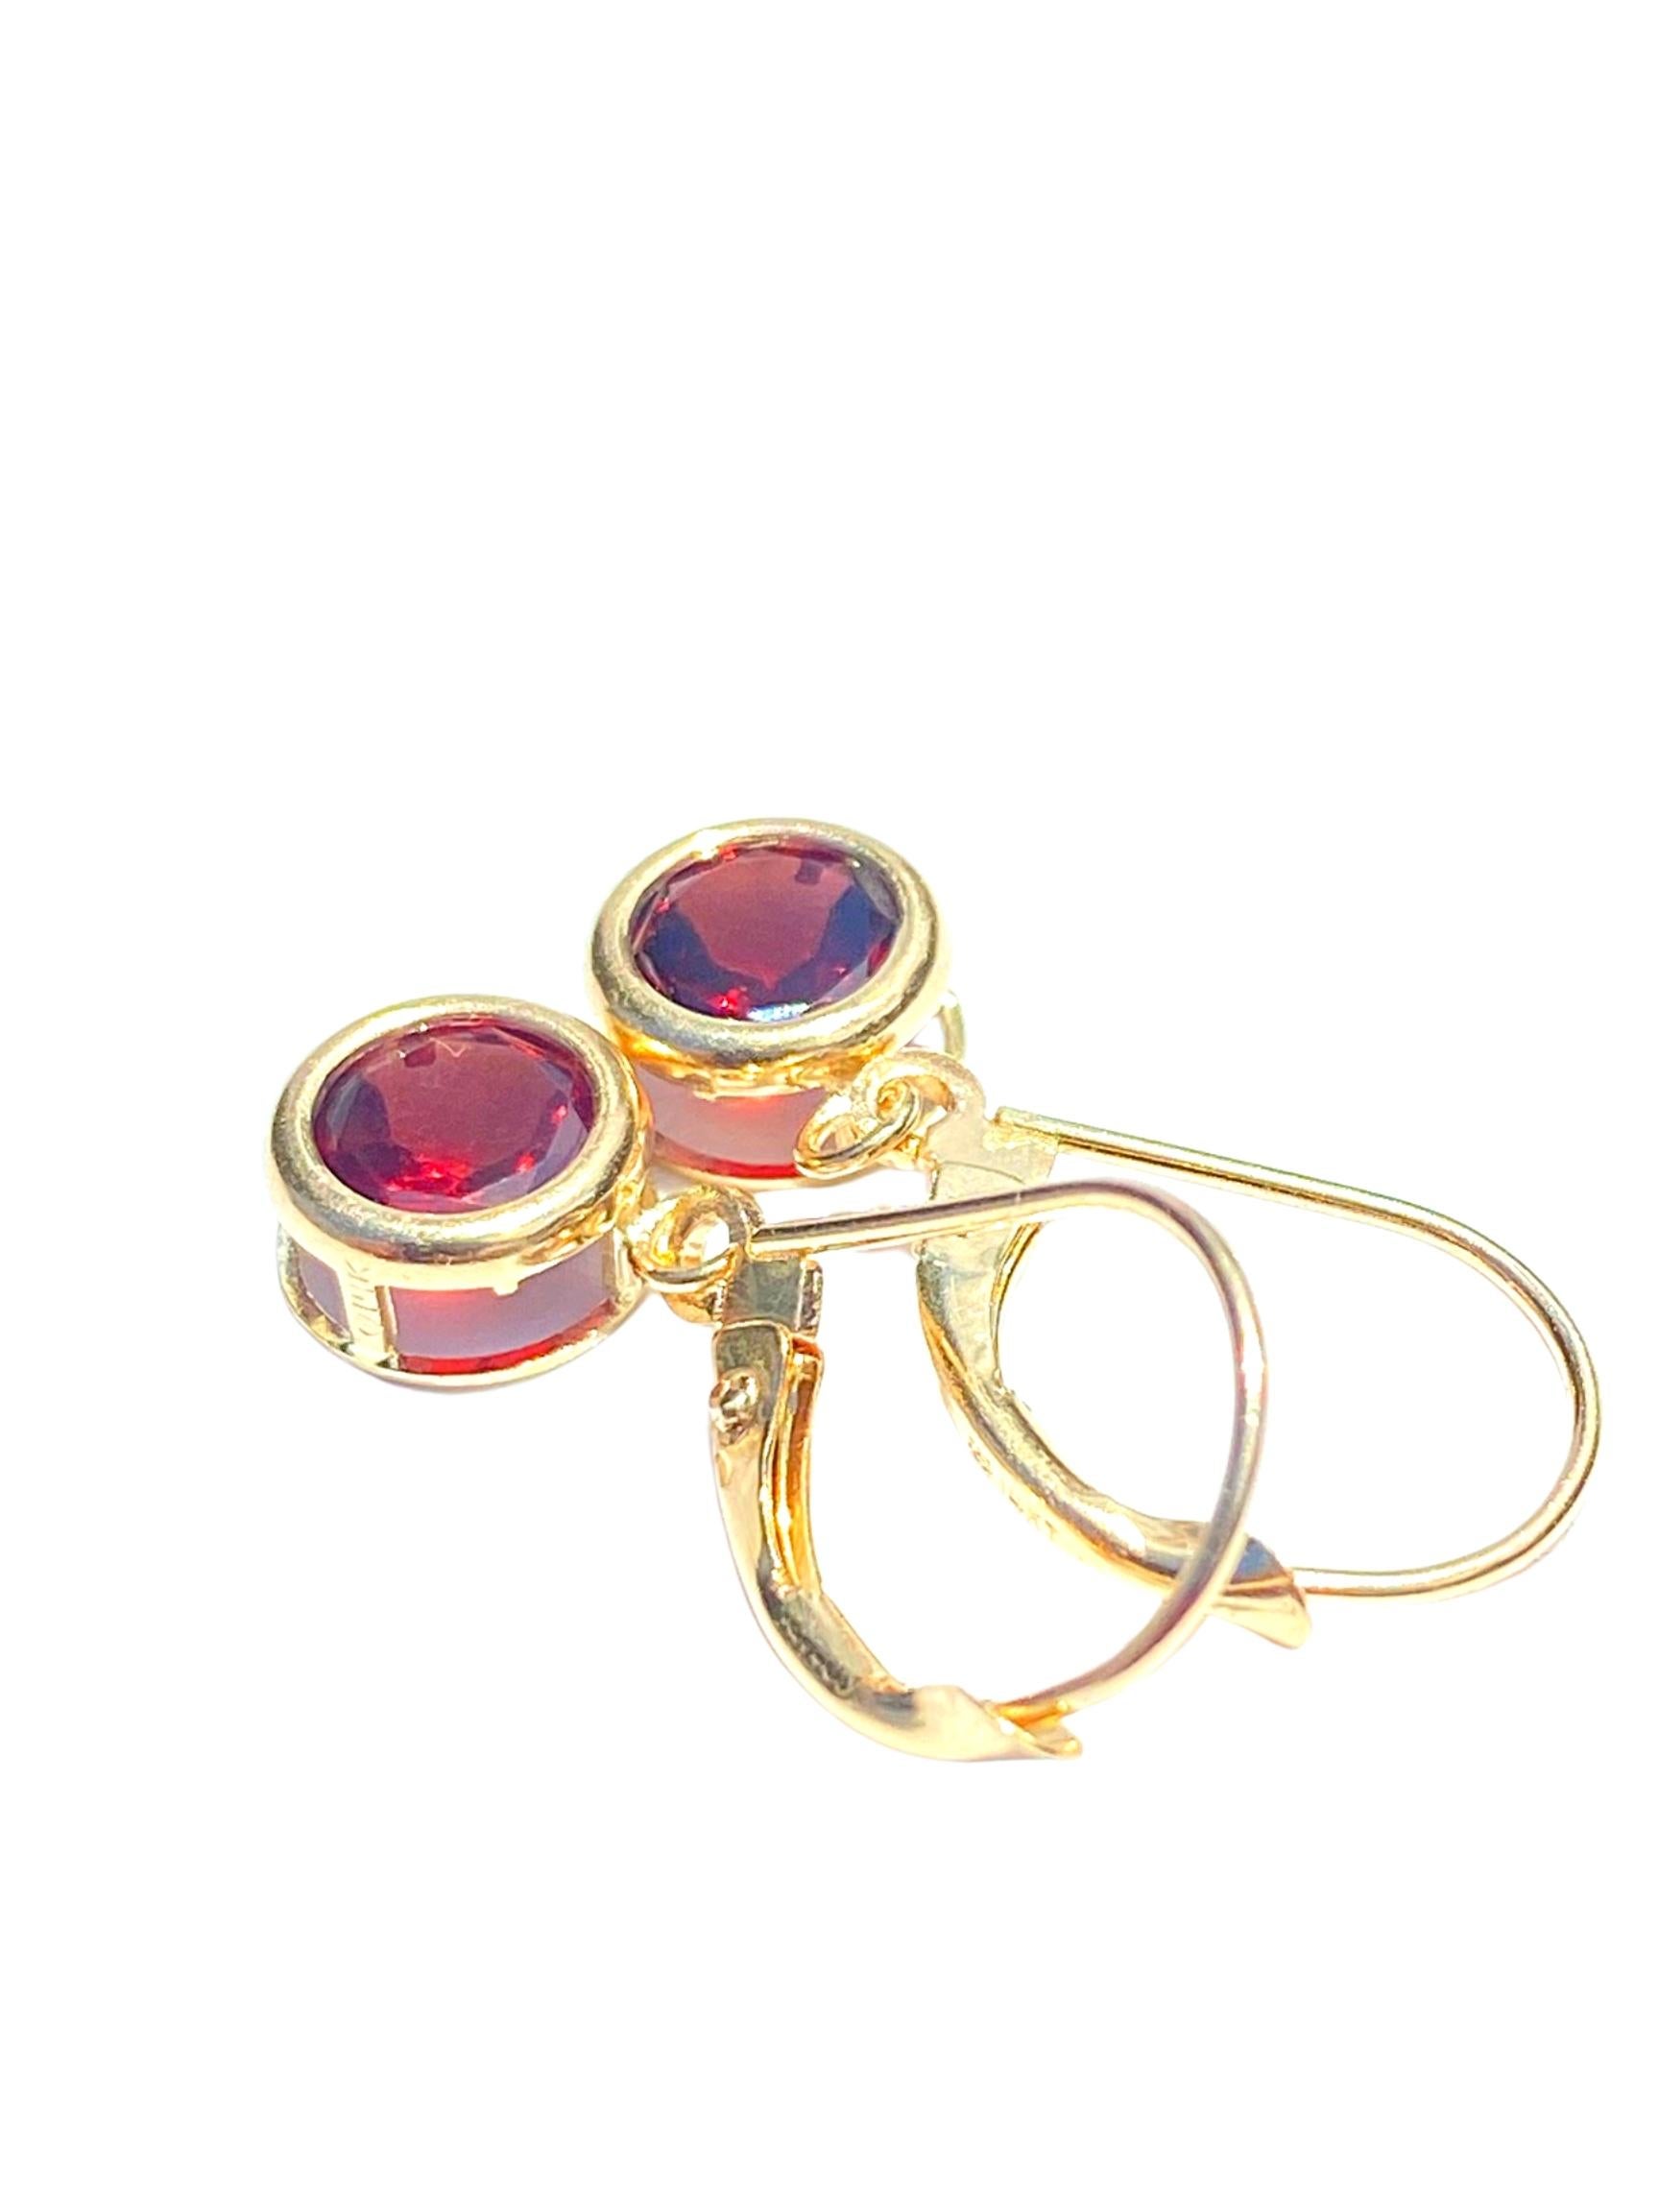 Round Cut 2.00 Carat Round-Brilliant Cut Red Garnet and 14K Yellow Gold Earrings For Sale